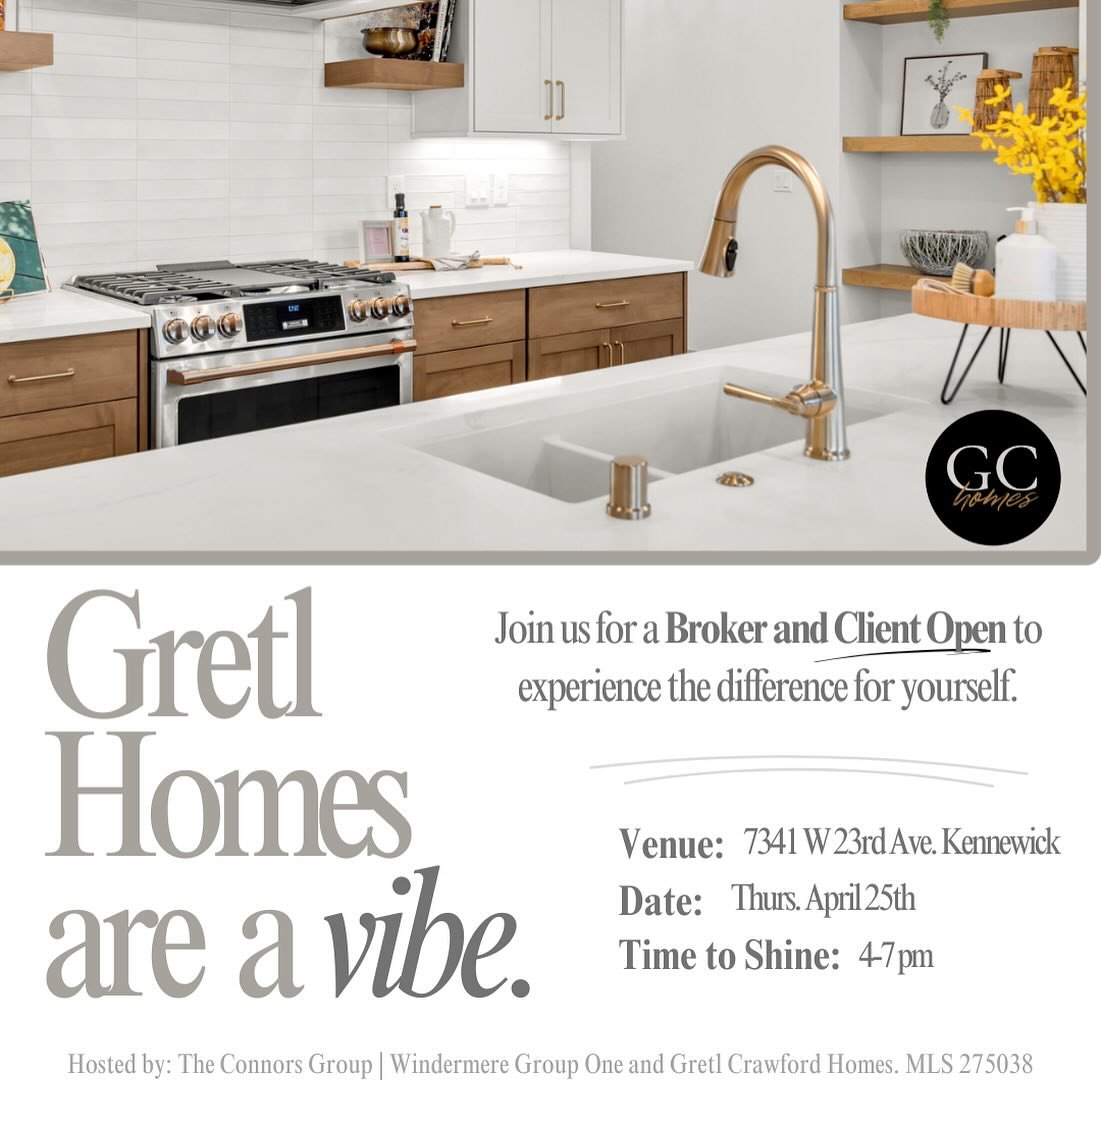 Super excited for this event next week!  Grab your favorite realtor and swing by!